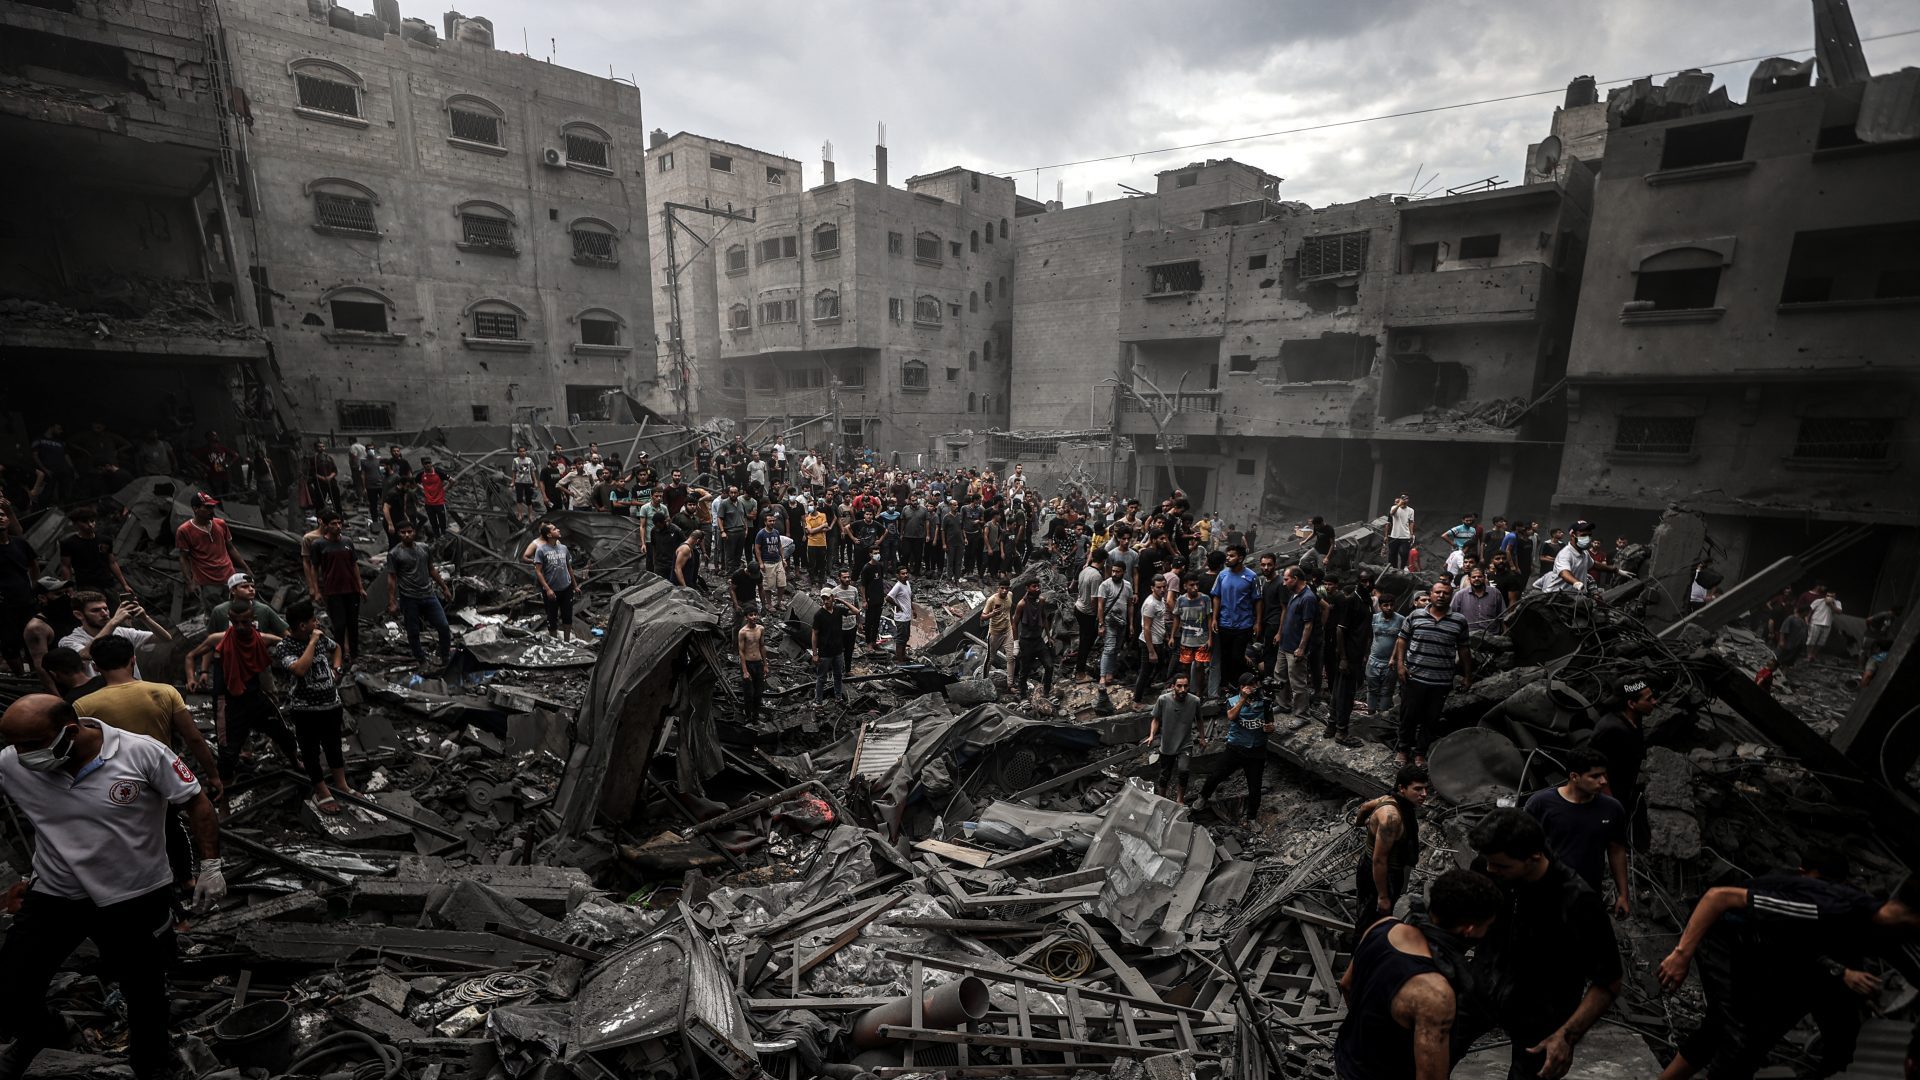 Civil defense teams and civilians conduct search and rescue operations after Israeli attacks on Al-Shati refugee camp of Gaza City. Photo: Ali Jadallah/Anadolu via Getty Images